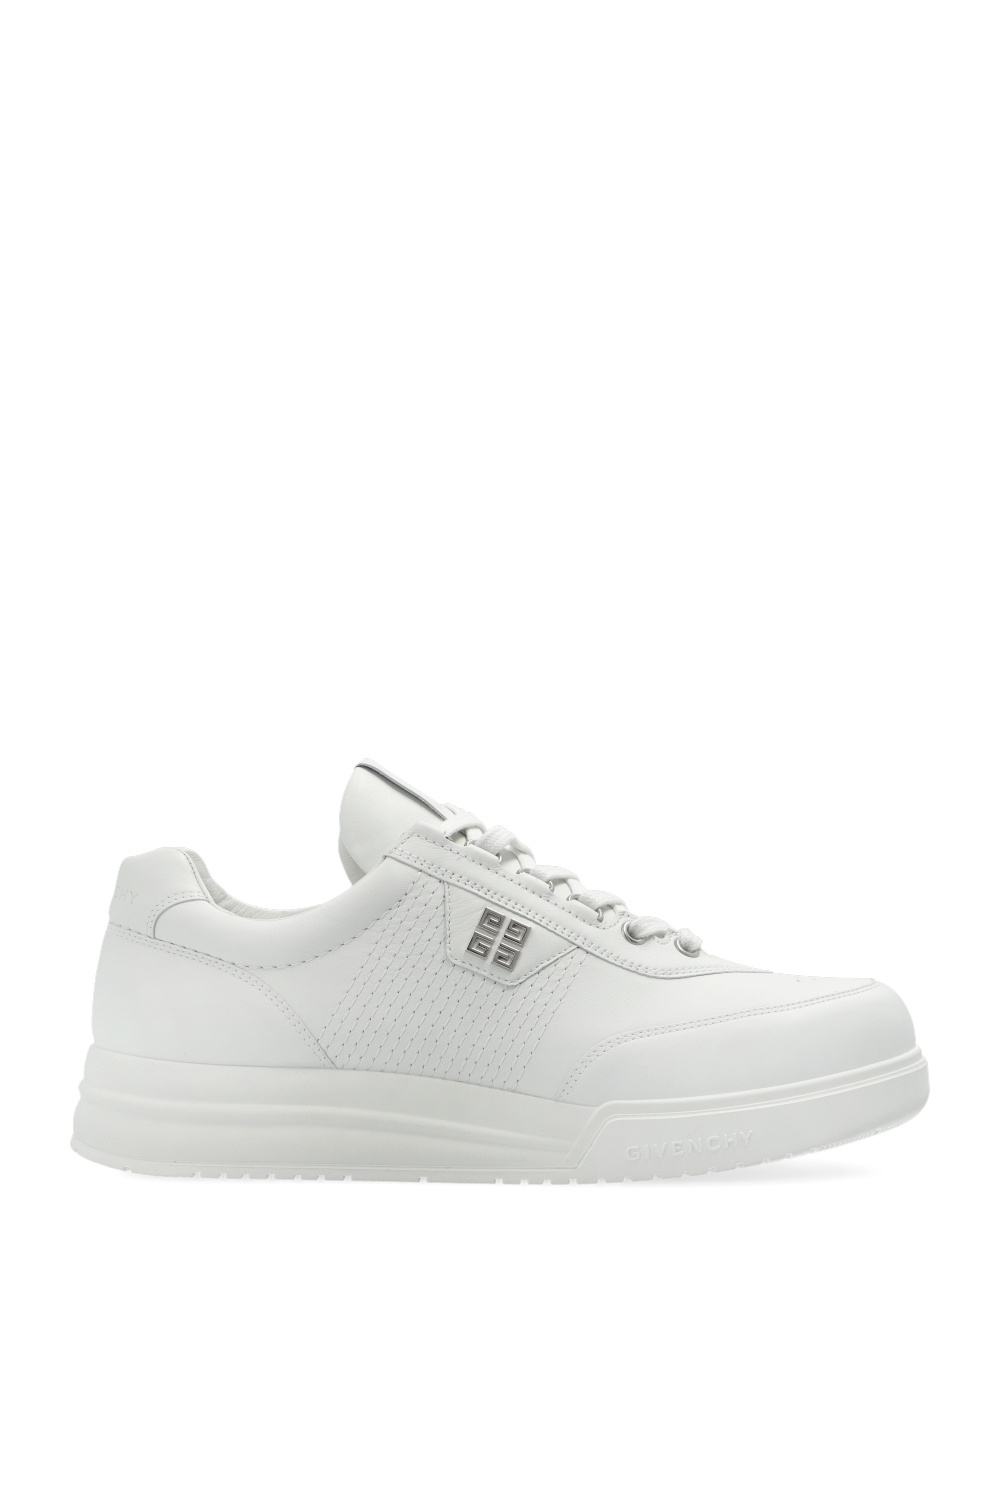 givenchy amp ‘G4’ sneakers